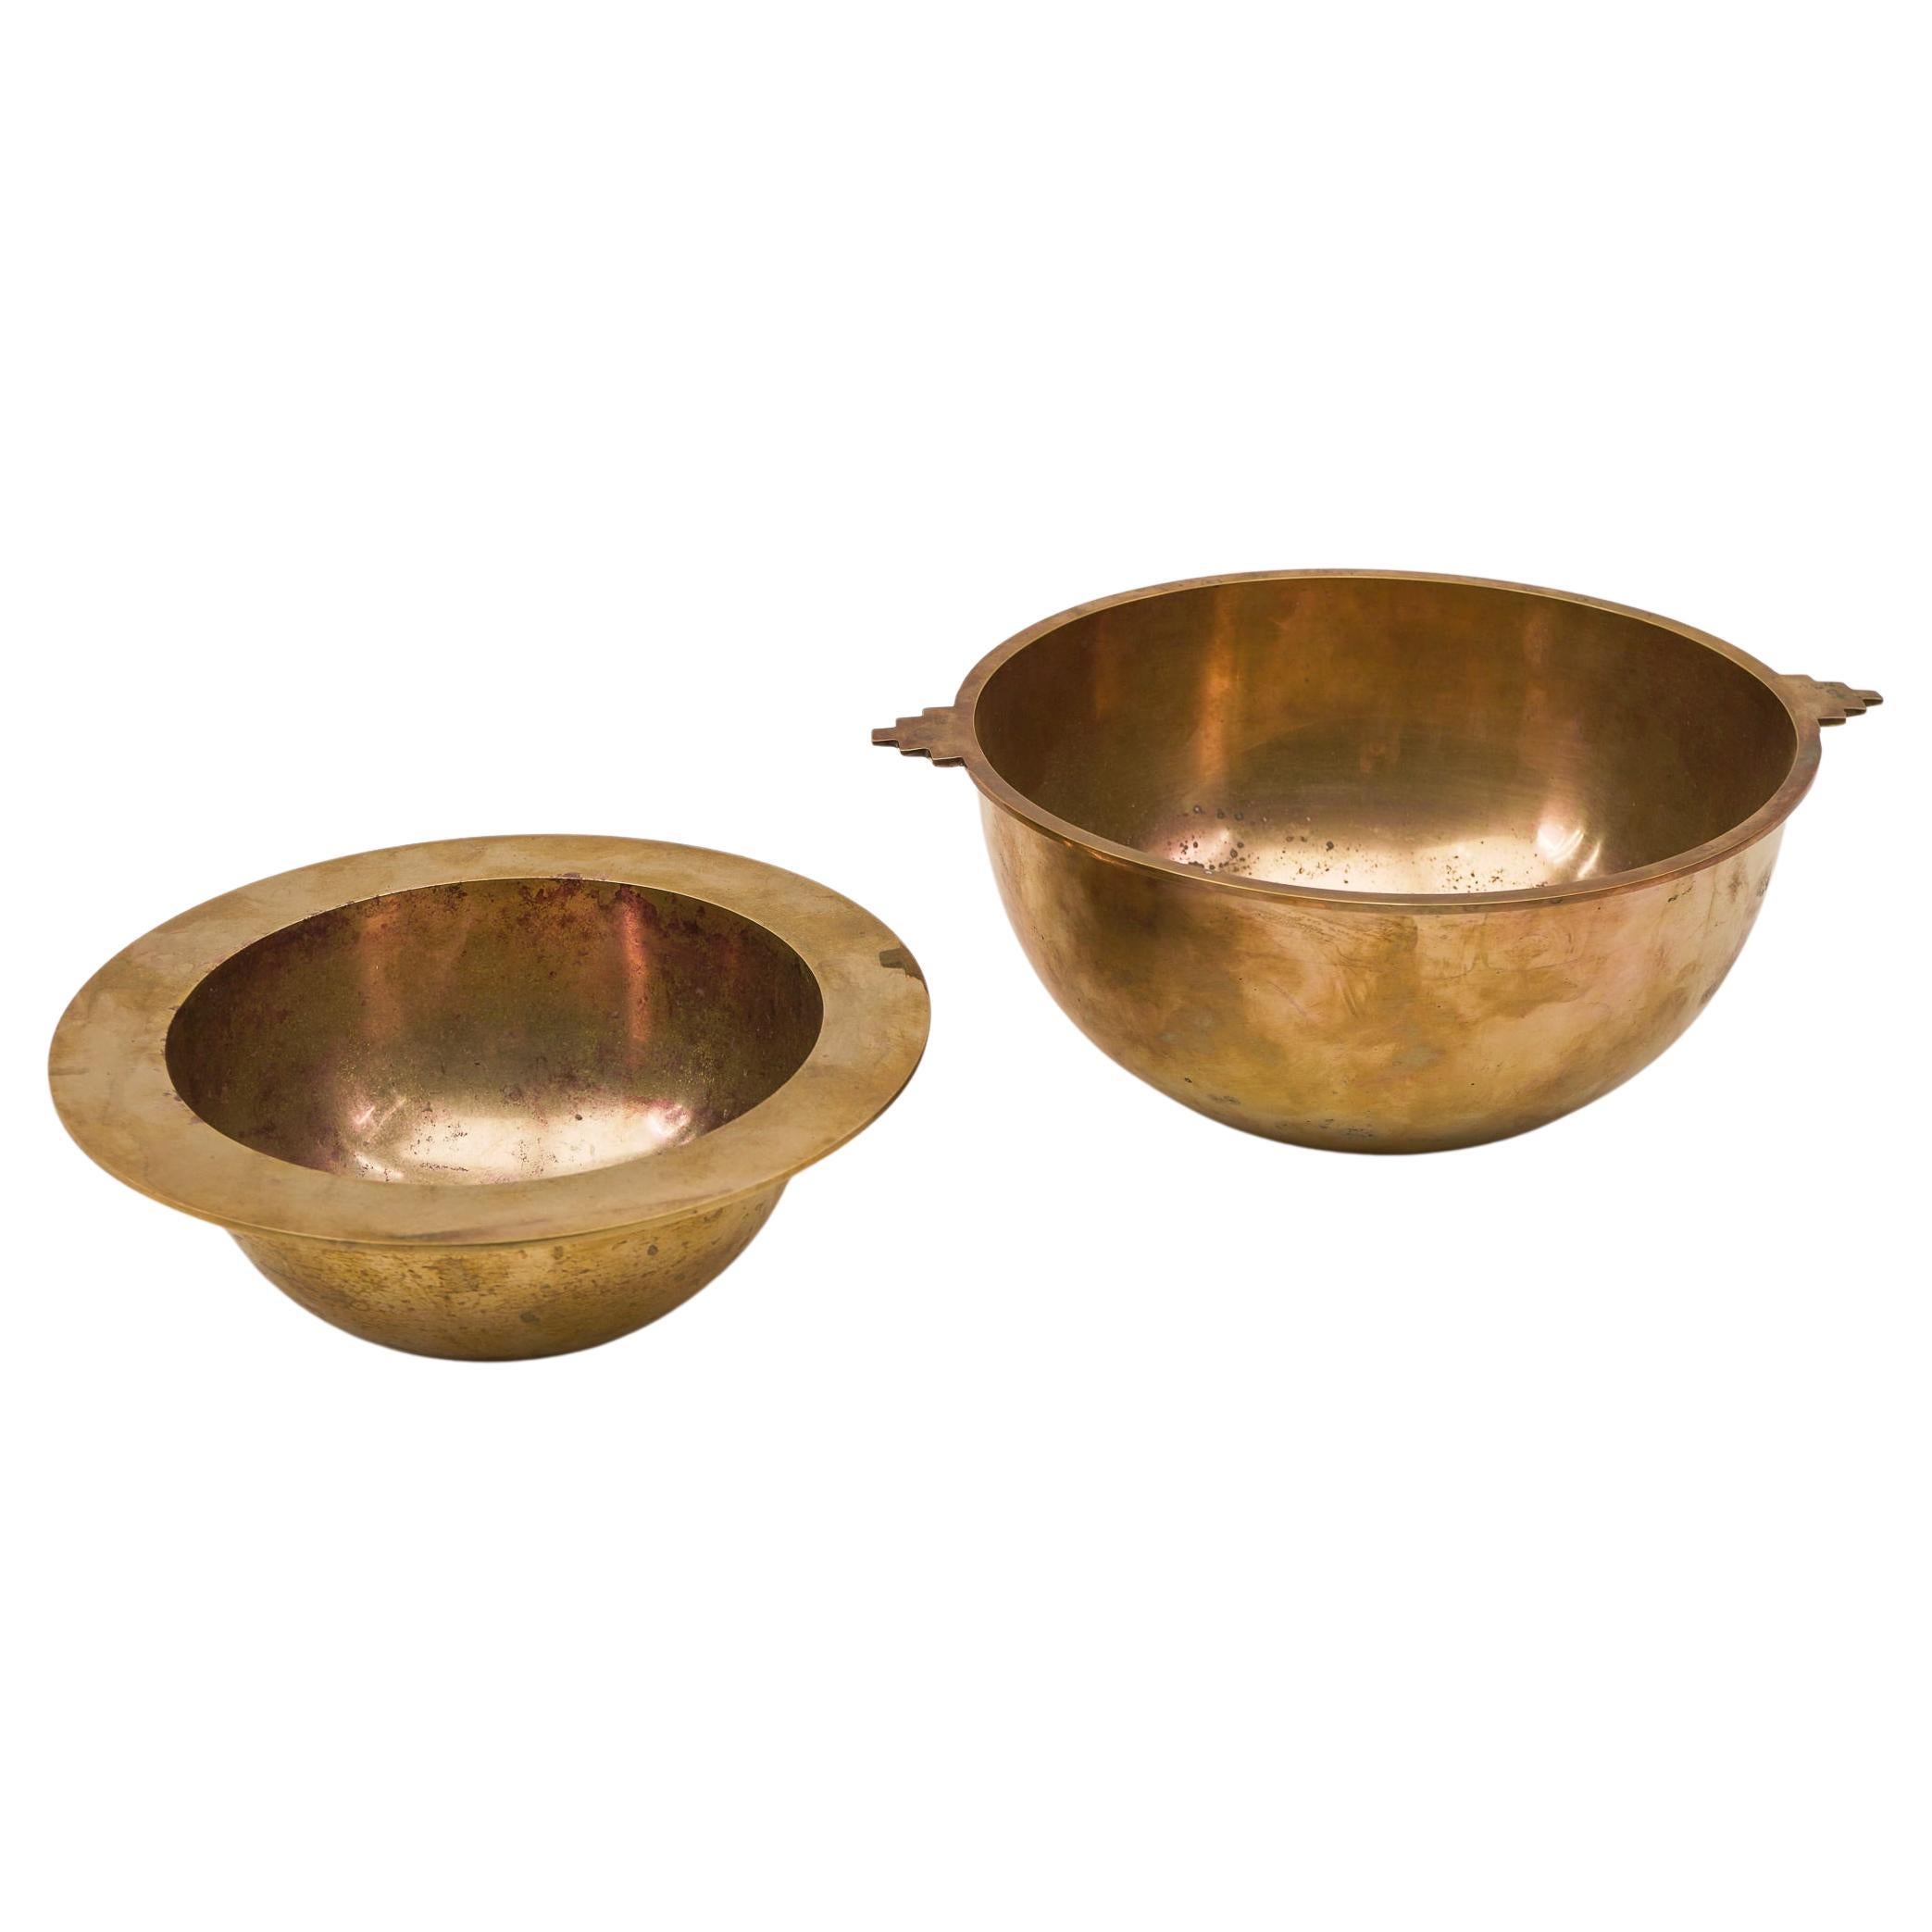 https://a.1stdibscdn.com/pair-of-lovely-solid-brass-bowls-from-the-1950s-for-sale/f_44432/f_348494721687262209401/f_34849472_1687262209970_bg_processed.jpg